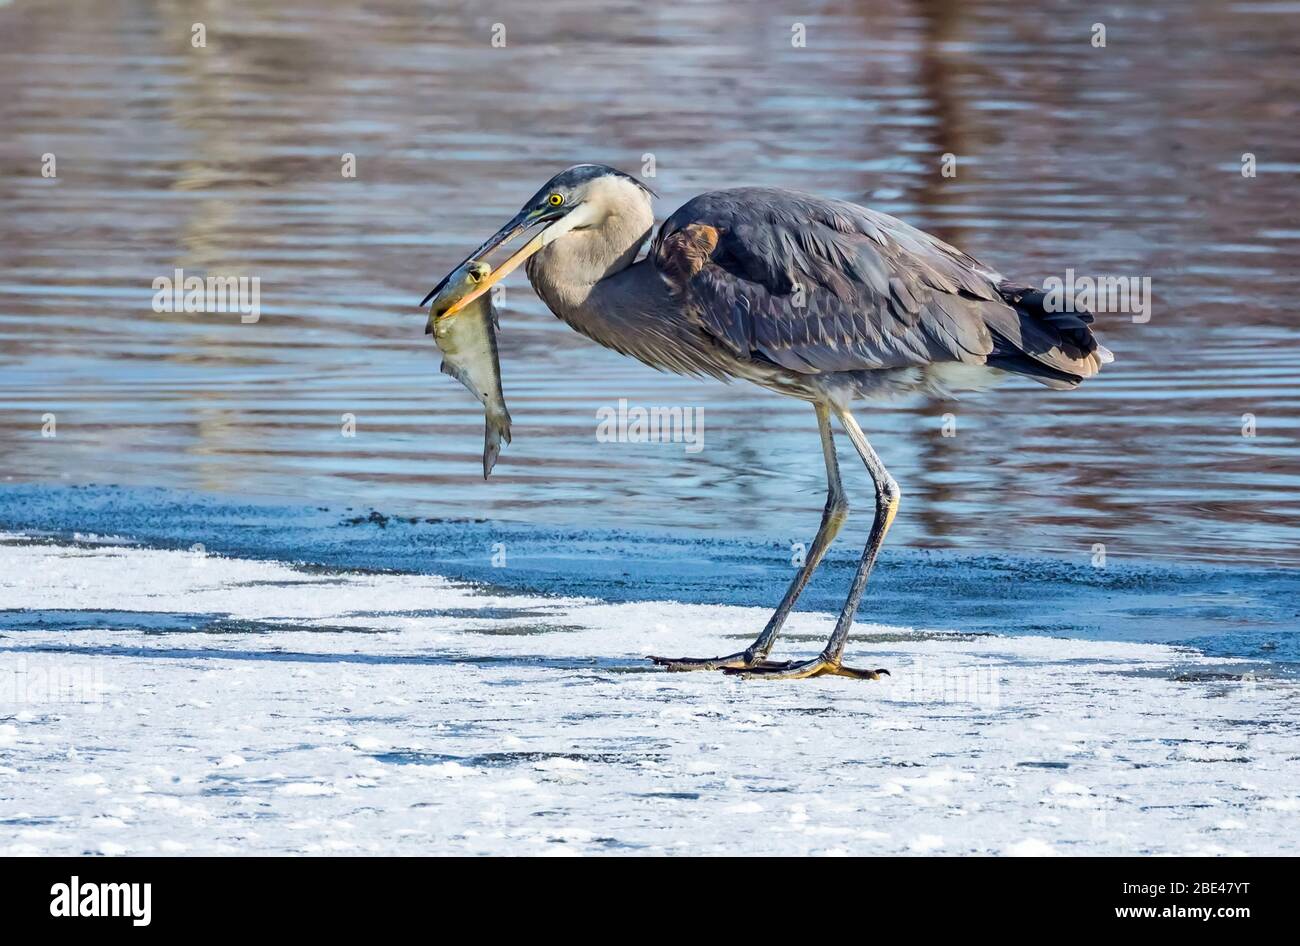 Great blue heron (Ardea herodias) stands on the snowy shore with a fish in it's mouth; Denver, Colorado, United States of America Stock Photo